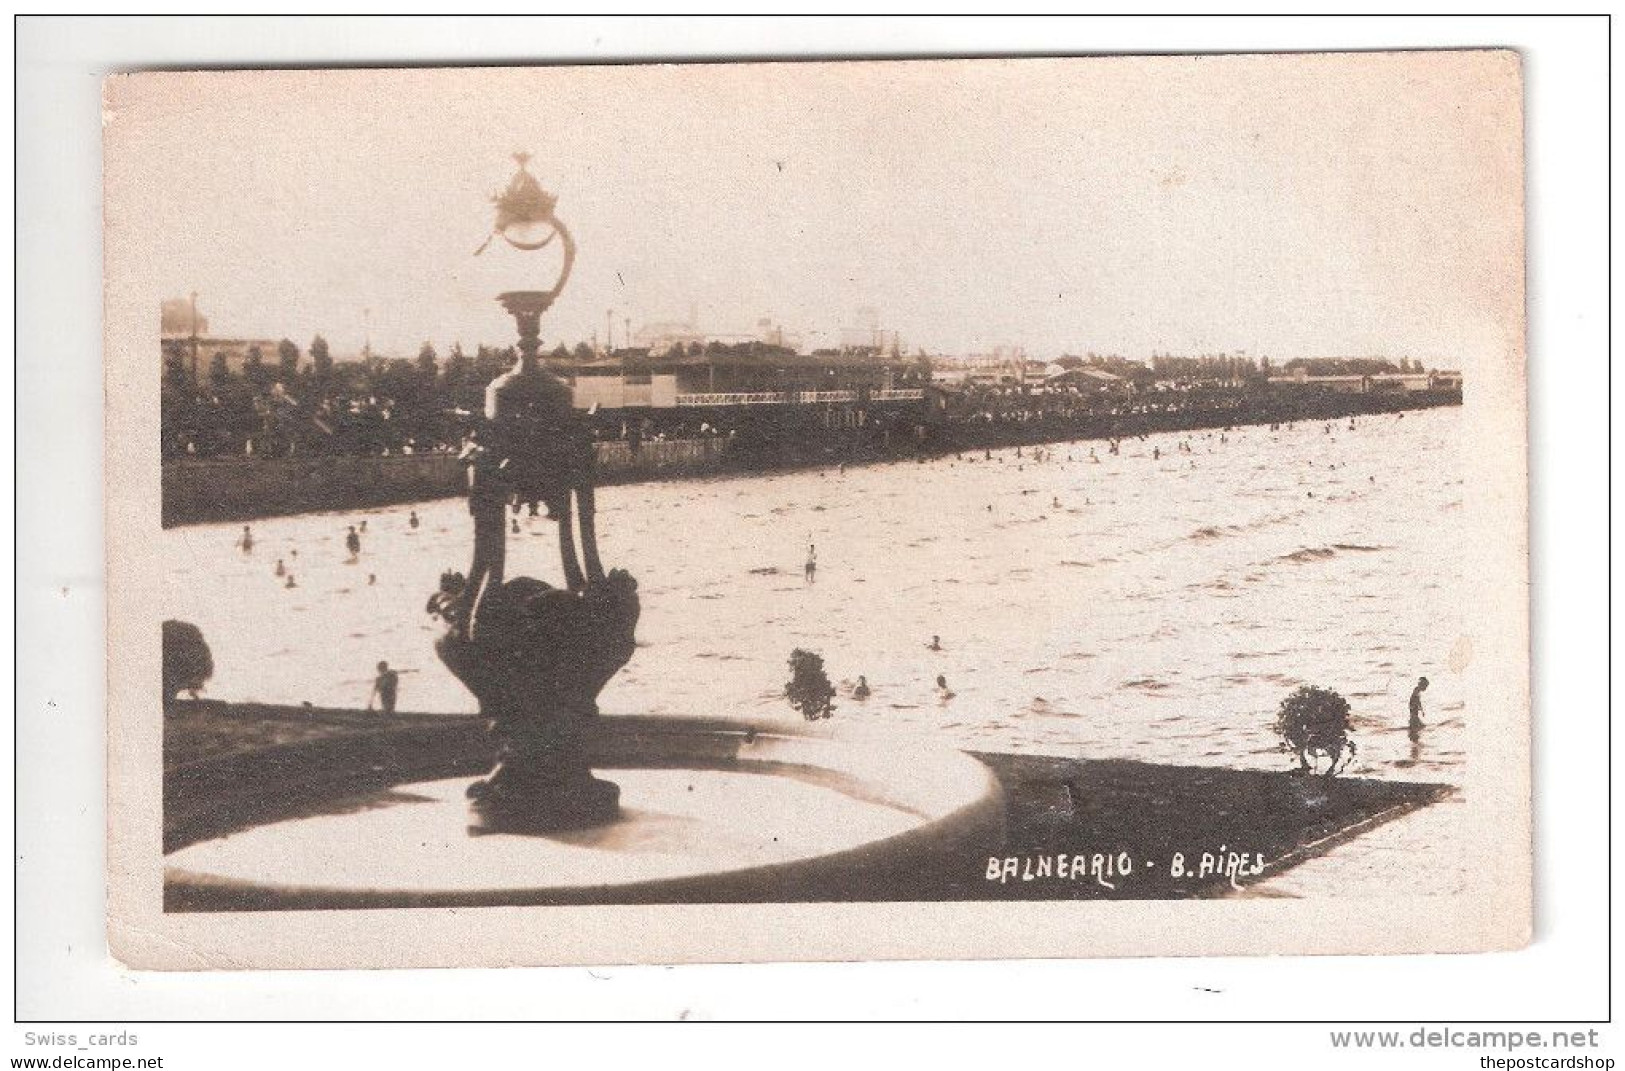 ARGENTINE - ARGENTINA - Buenos Aires BALNEARIO USED LIDO SWIMMING POOL  I CLYDE ROAD  WEST DIDSBURY  MANCHESTER  3/7/192 - Argentinien